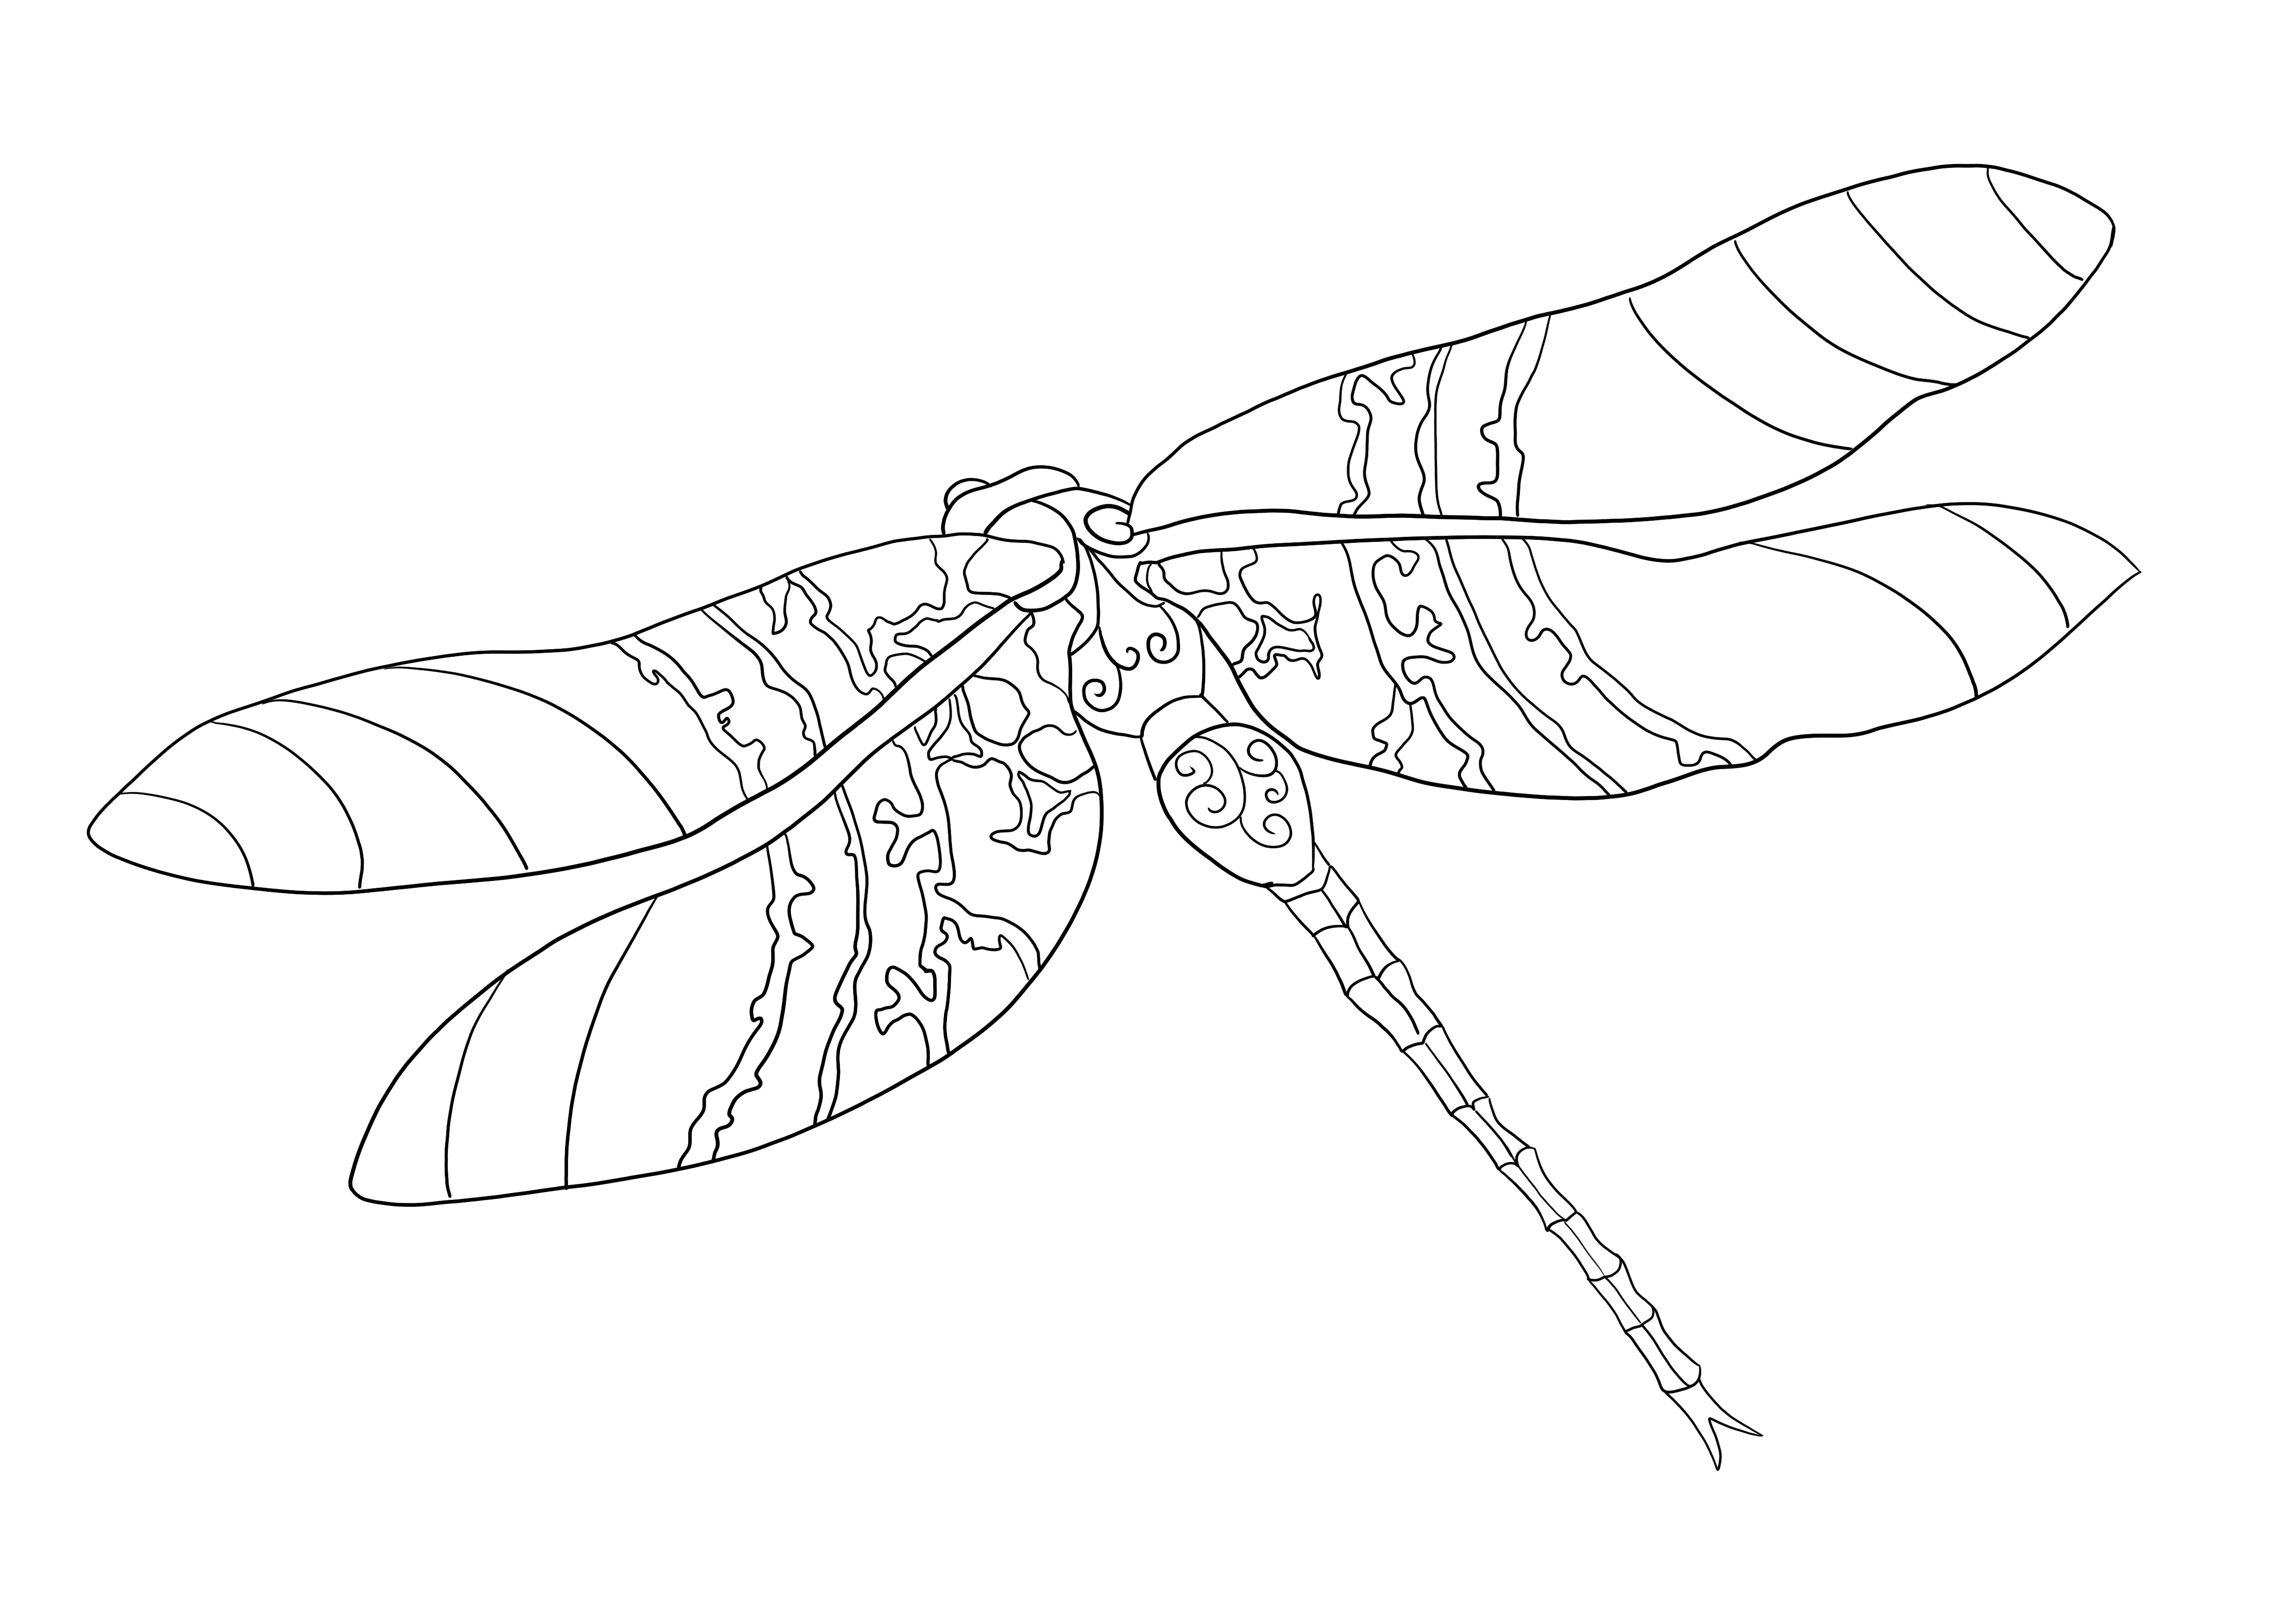 Dragonfly free printing and coloring image